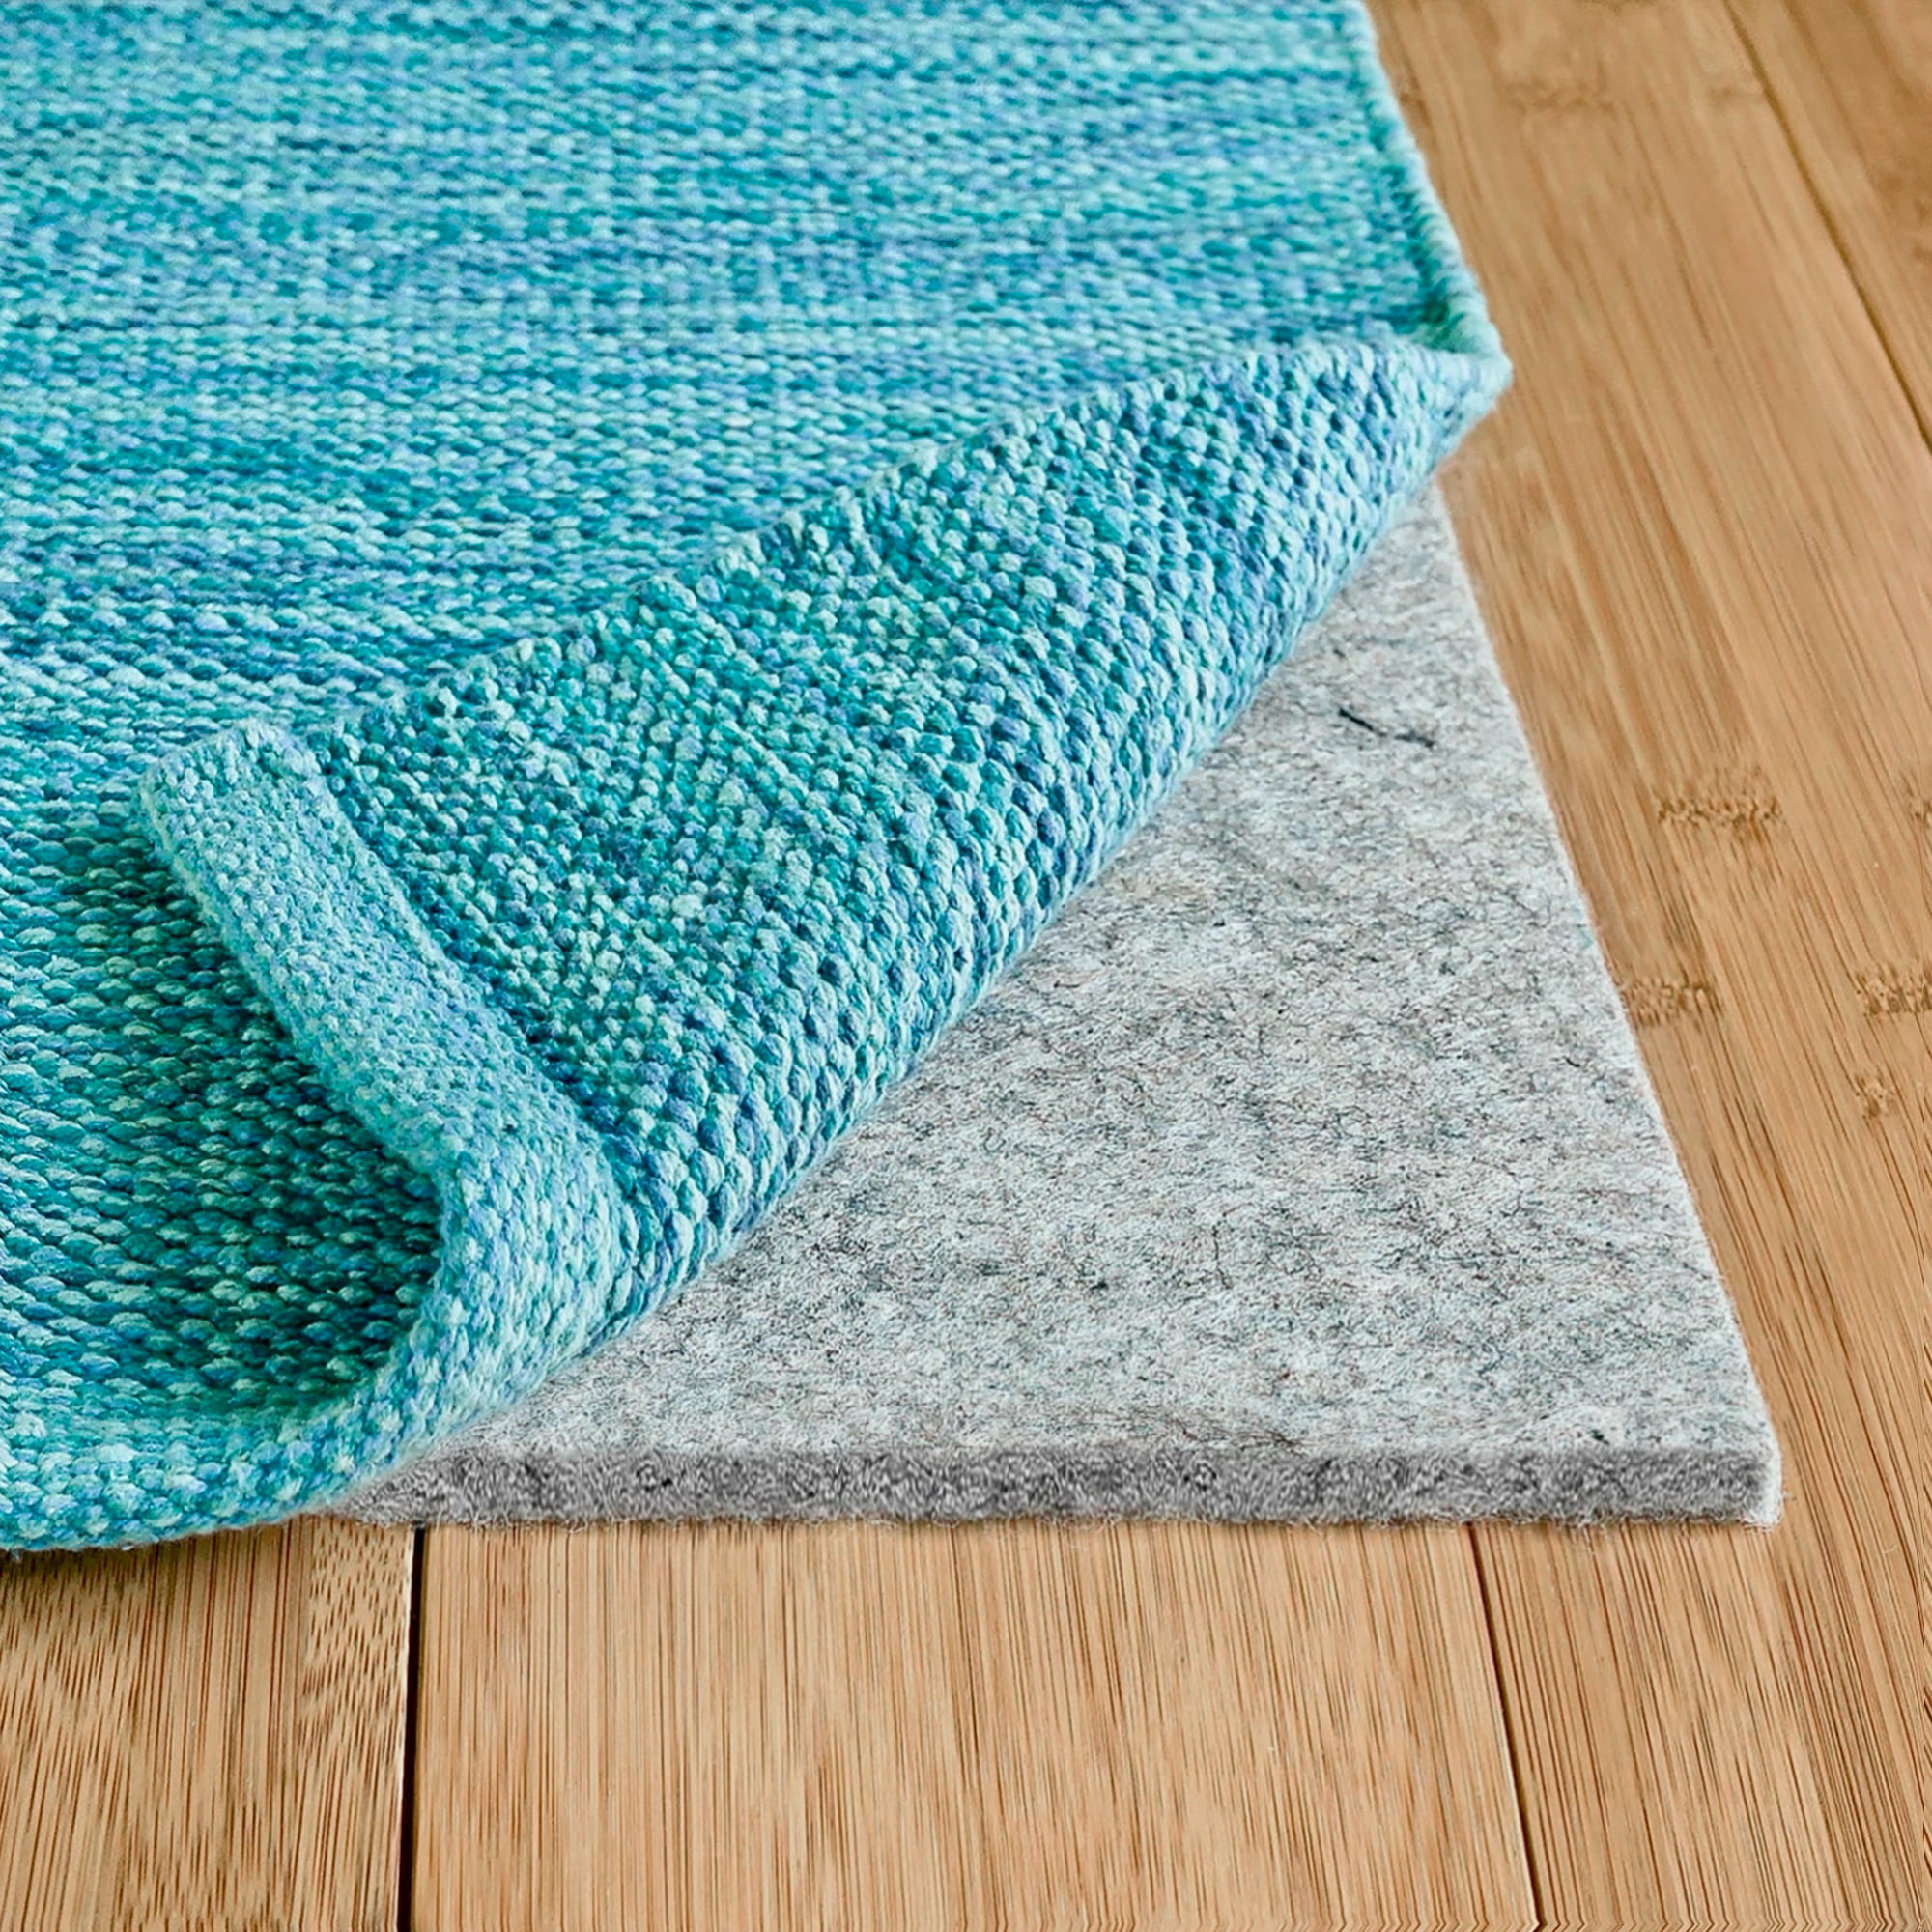 Felt Rug Pad Safe For All Floors And, What Type Of Rug Pad For Hardwood Floors